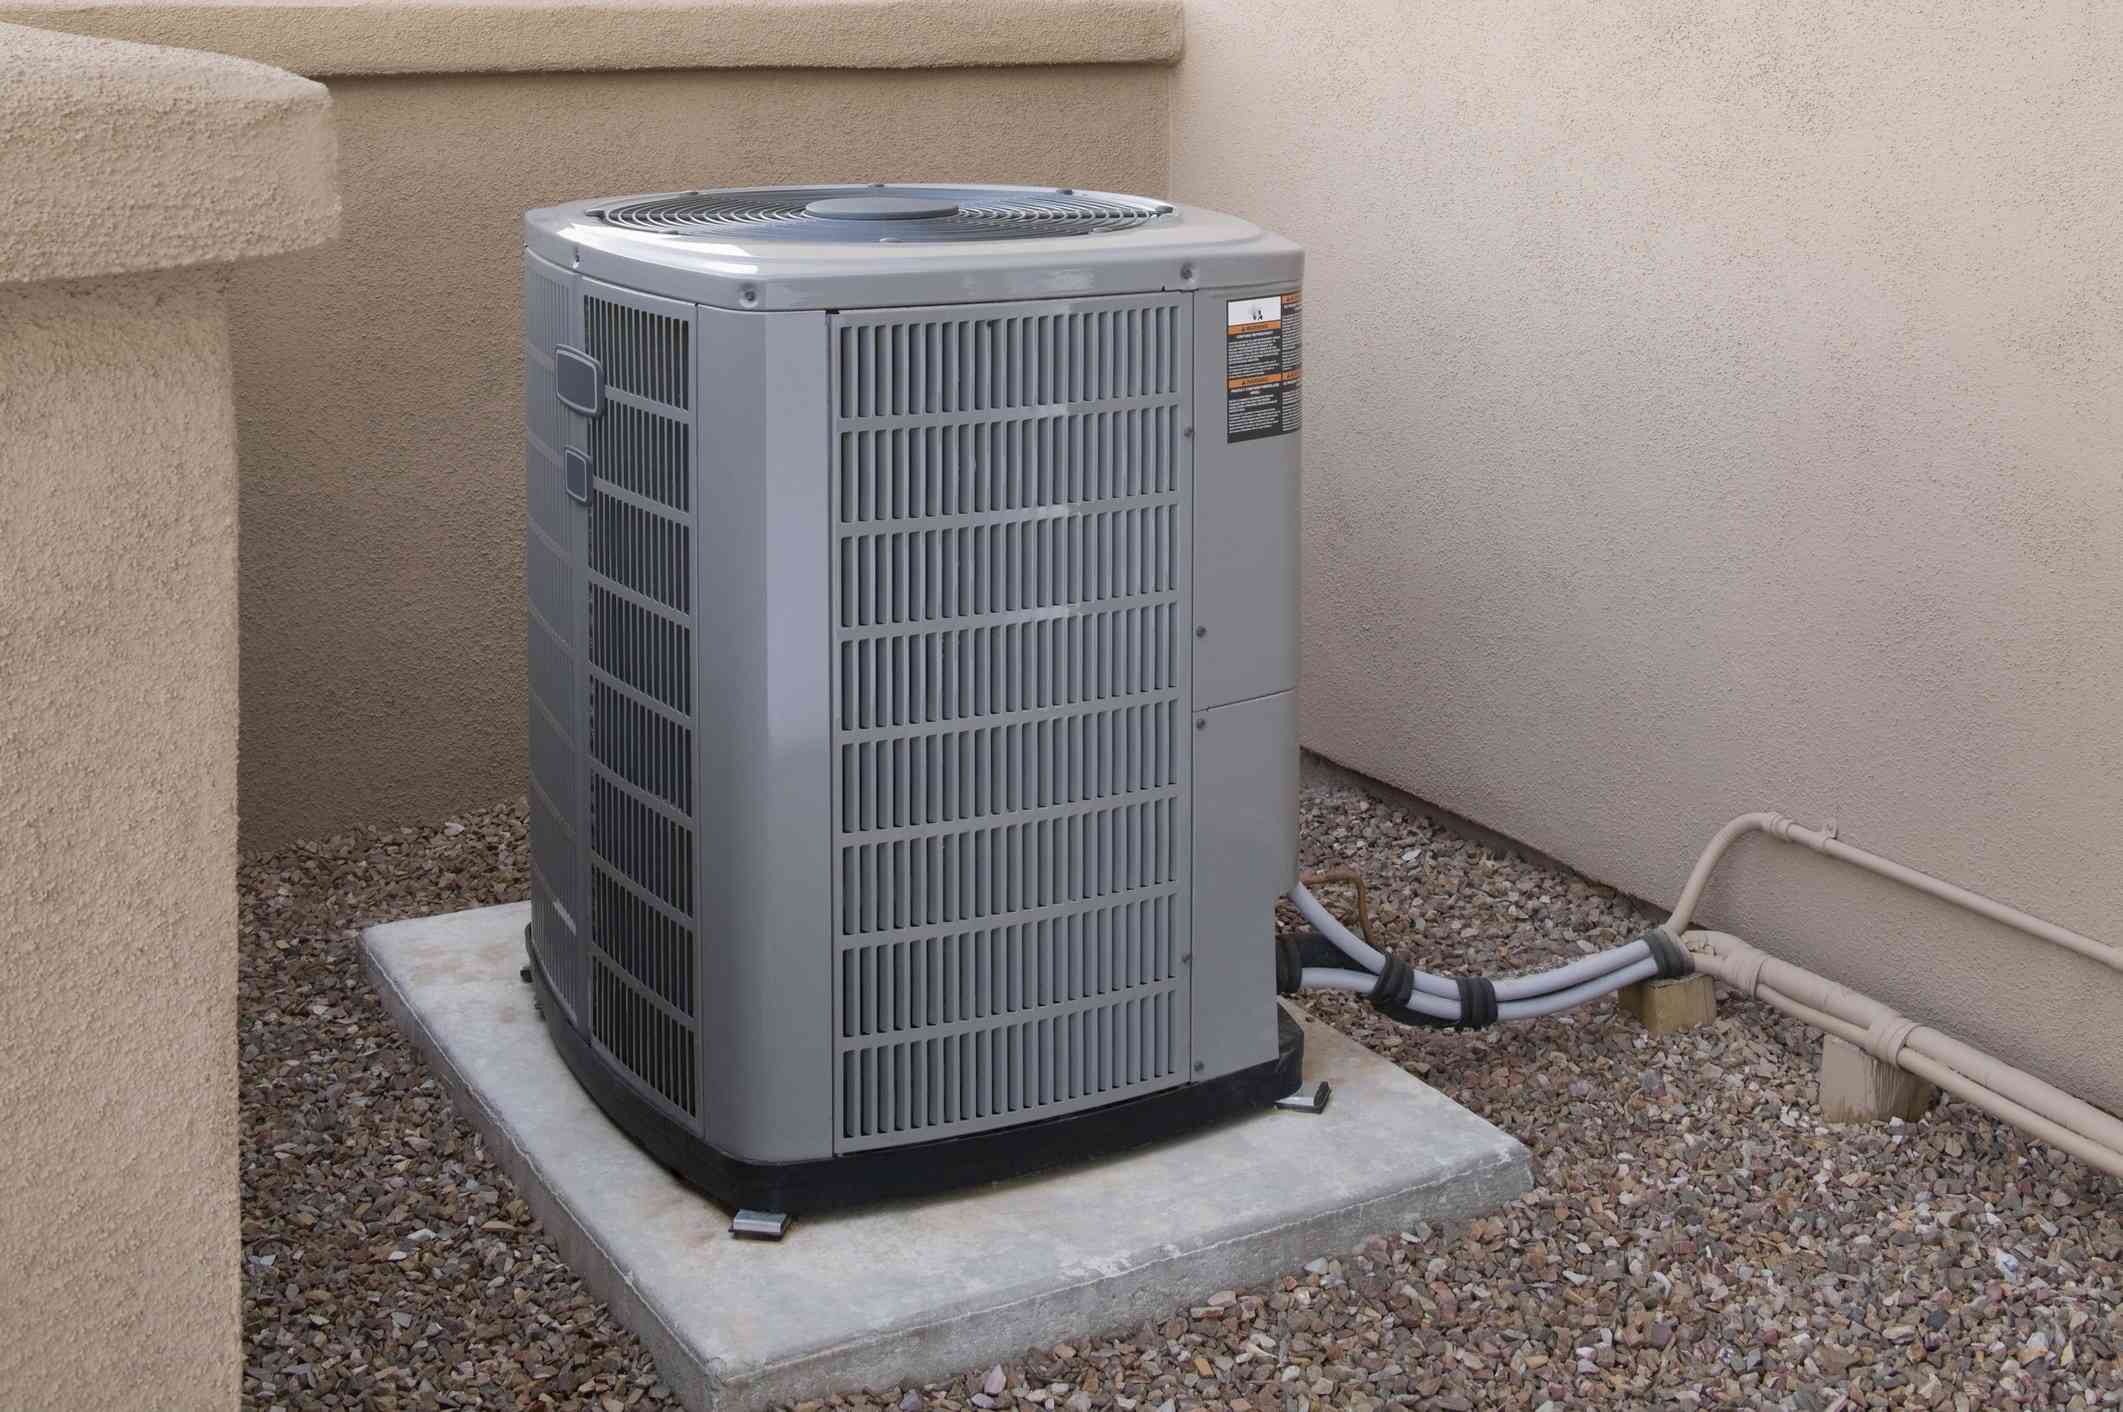 Central Air Conditioning Systems Construction and Working